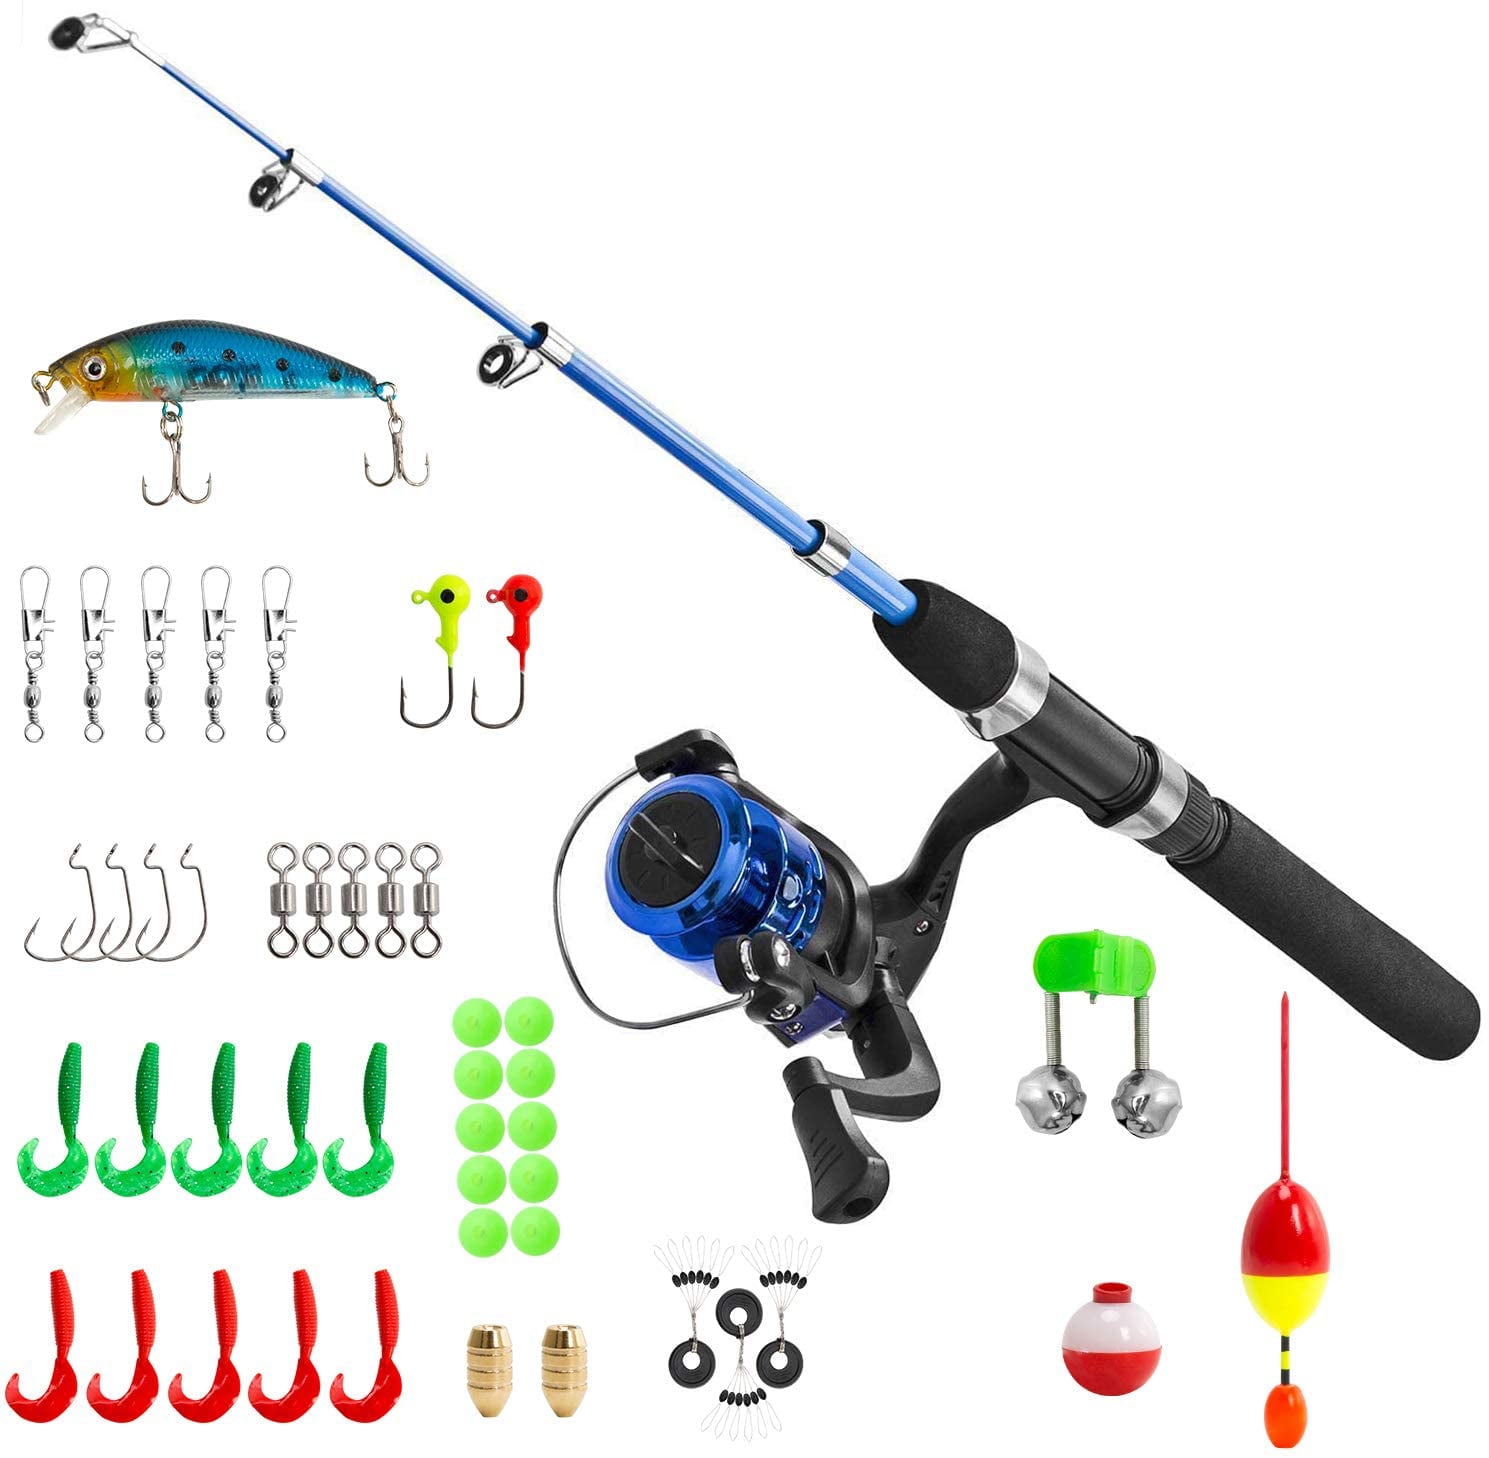 PLUSINNO Kids Fishing Pole,Light and Portable Telescopic Fishing Rod and Reel Combos for Youth ice Fishing